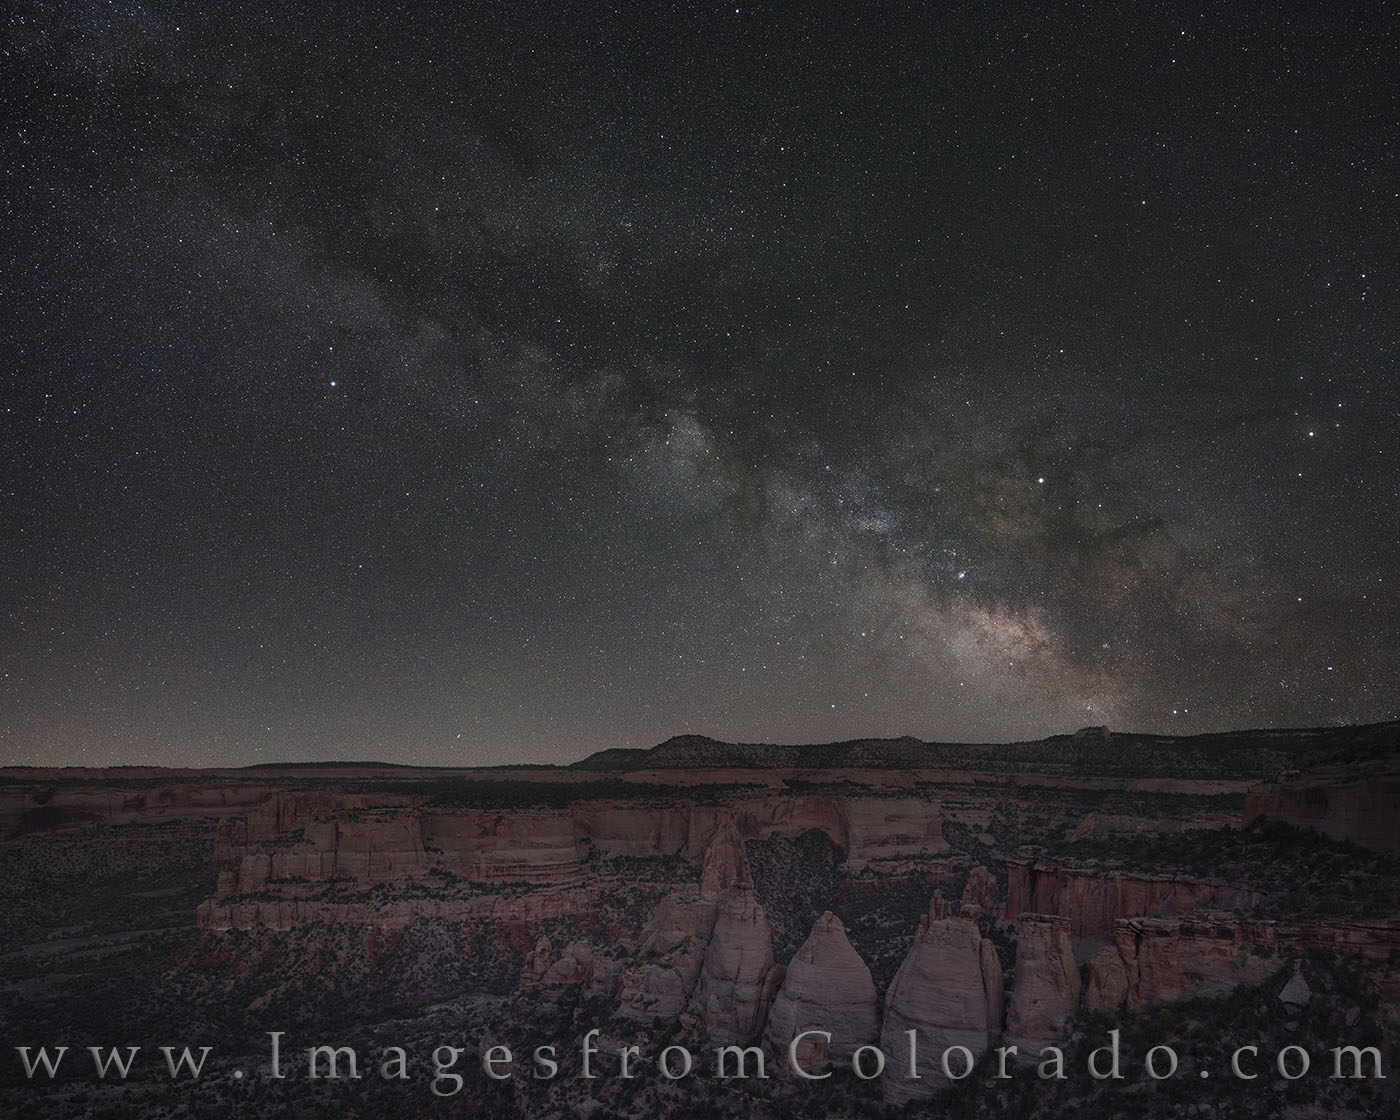 From the Coke Ovens in Colorado National Monument, the Milky Way begins its ascent into the night sky. This Milky Way image is...